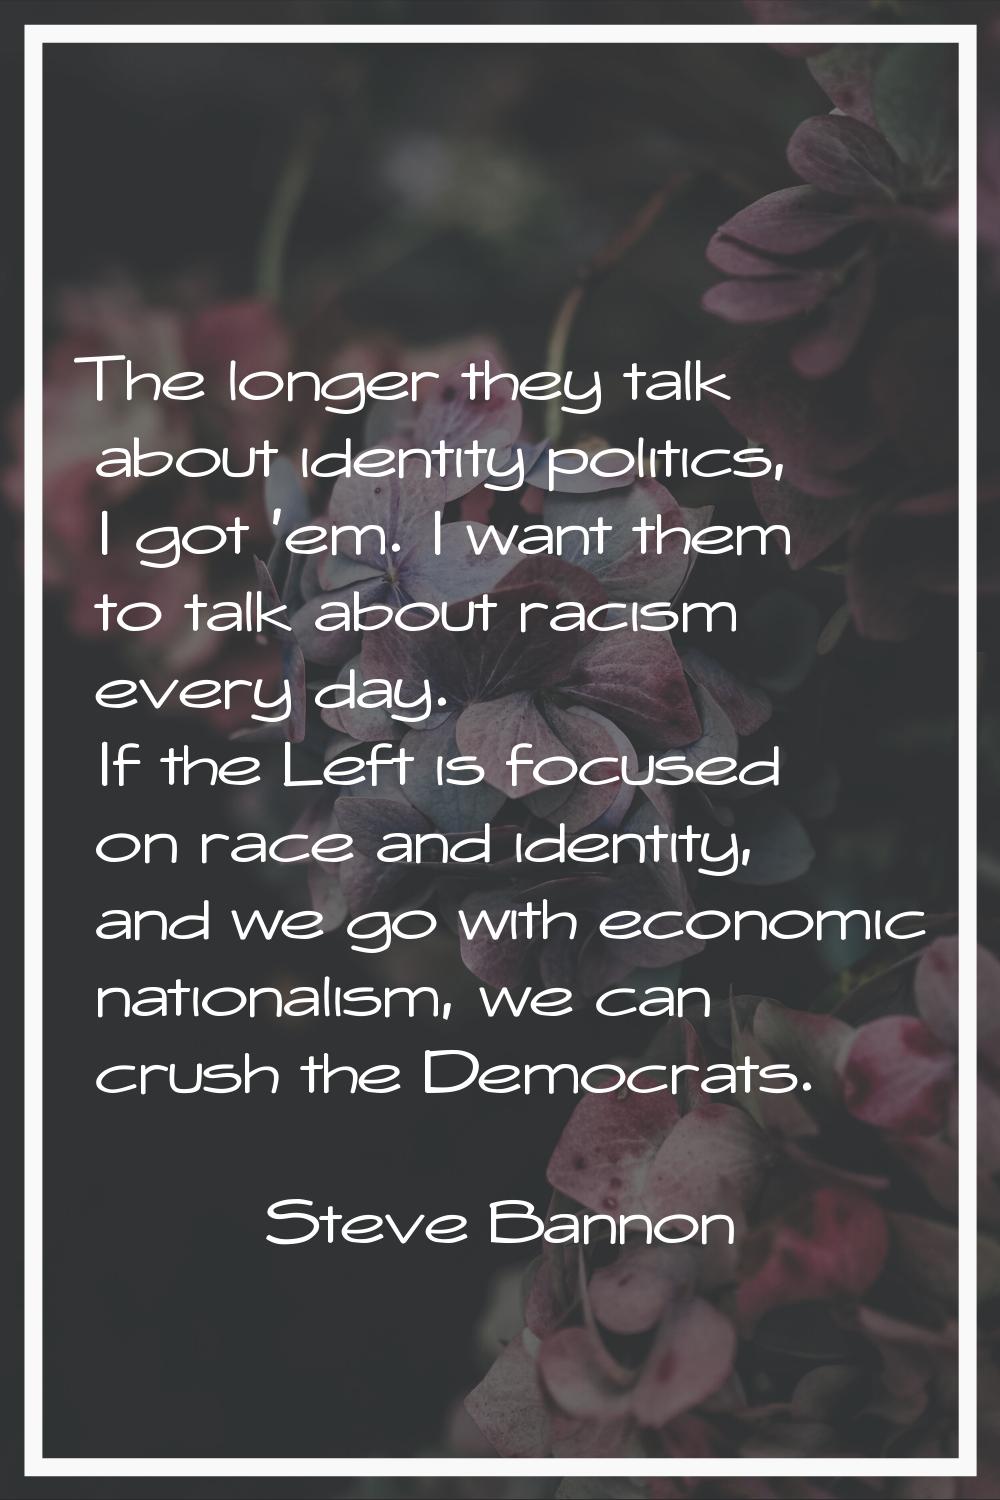 The longer they talk about identity politics, I got 'em. I want them to talk about racism every day